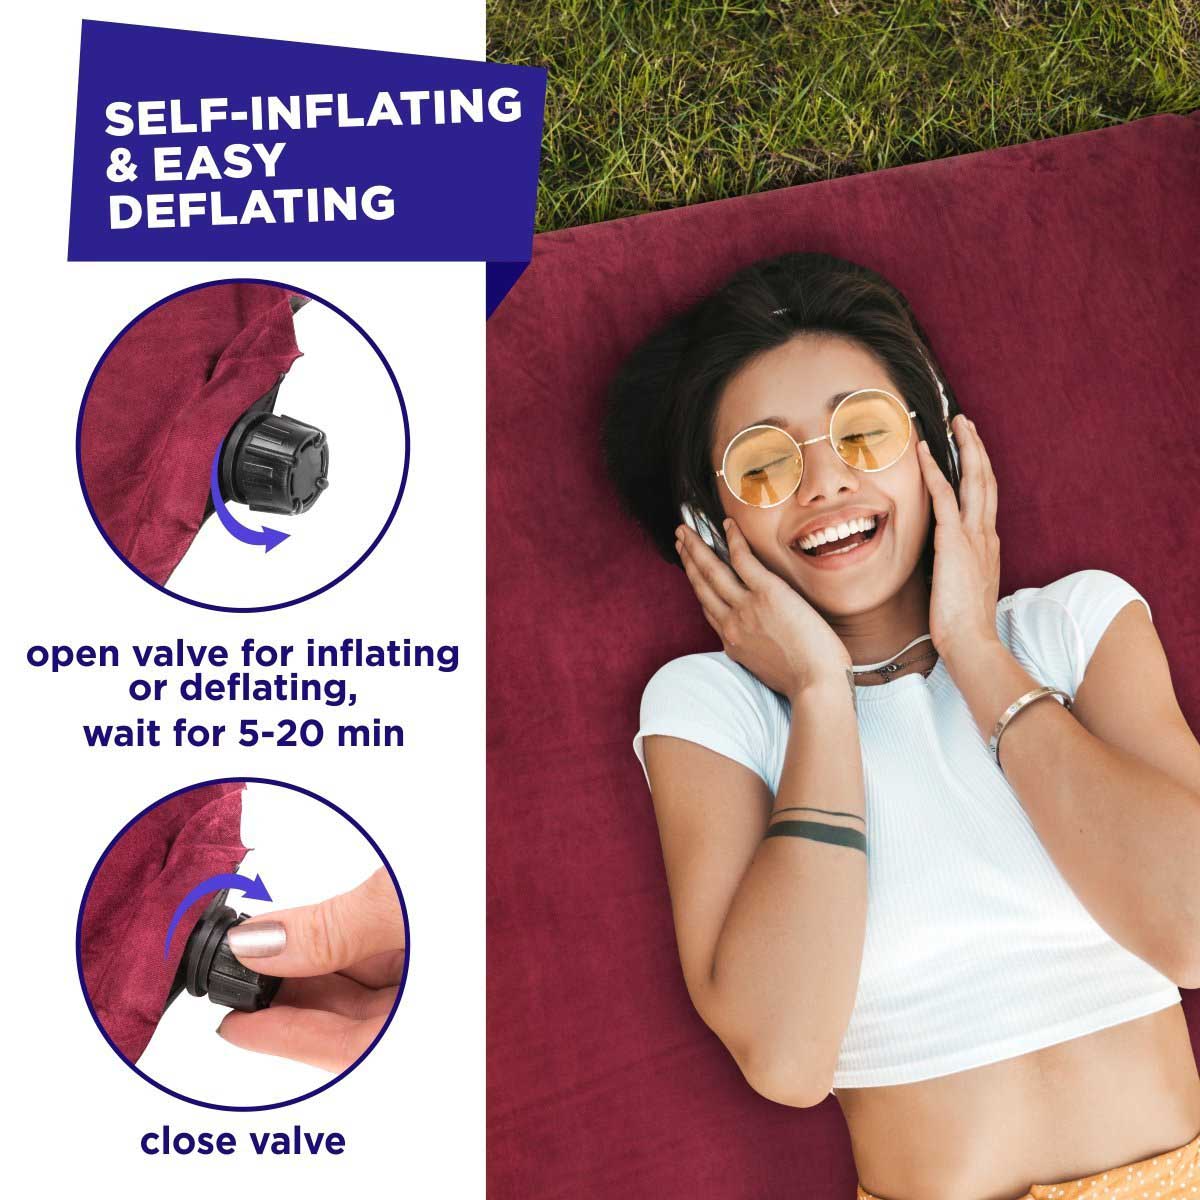 3-inch Self Inflating Camping Sleeping Pad is easily inflating - just open the valve and close it after 5-20 minutes